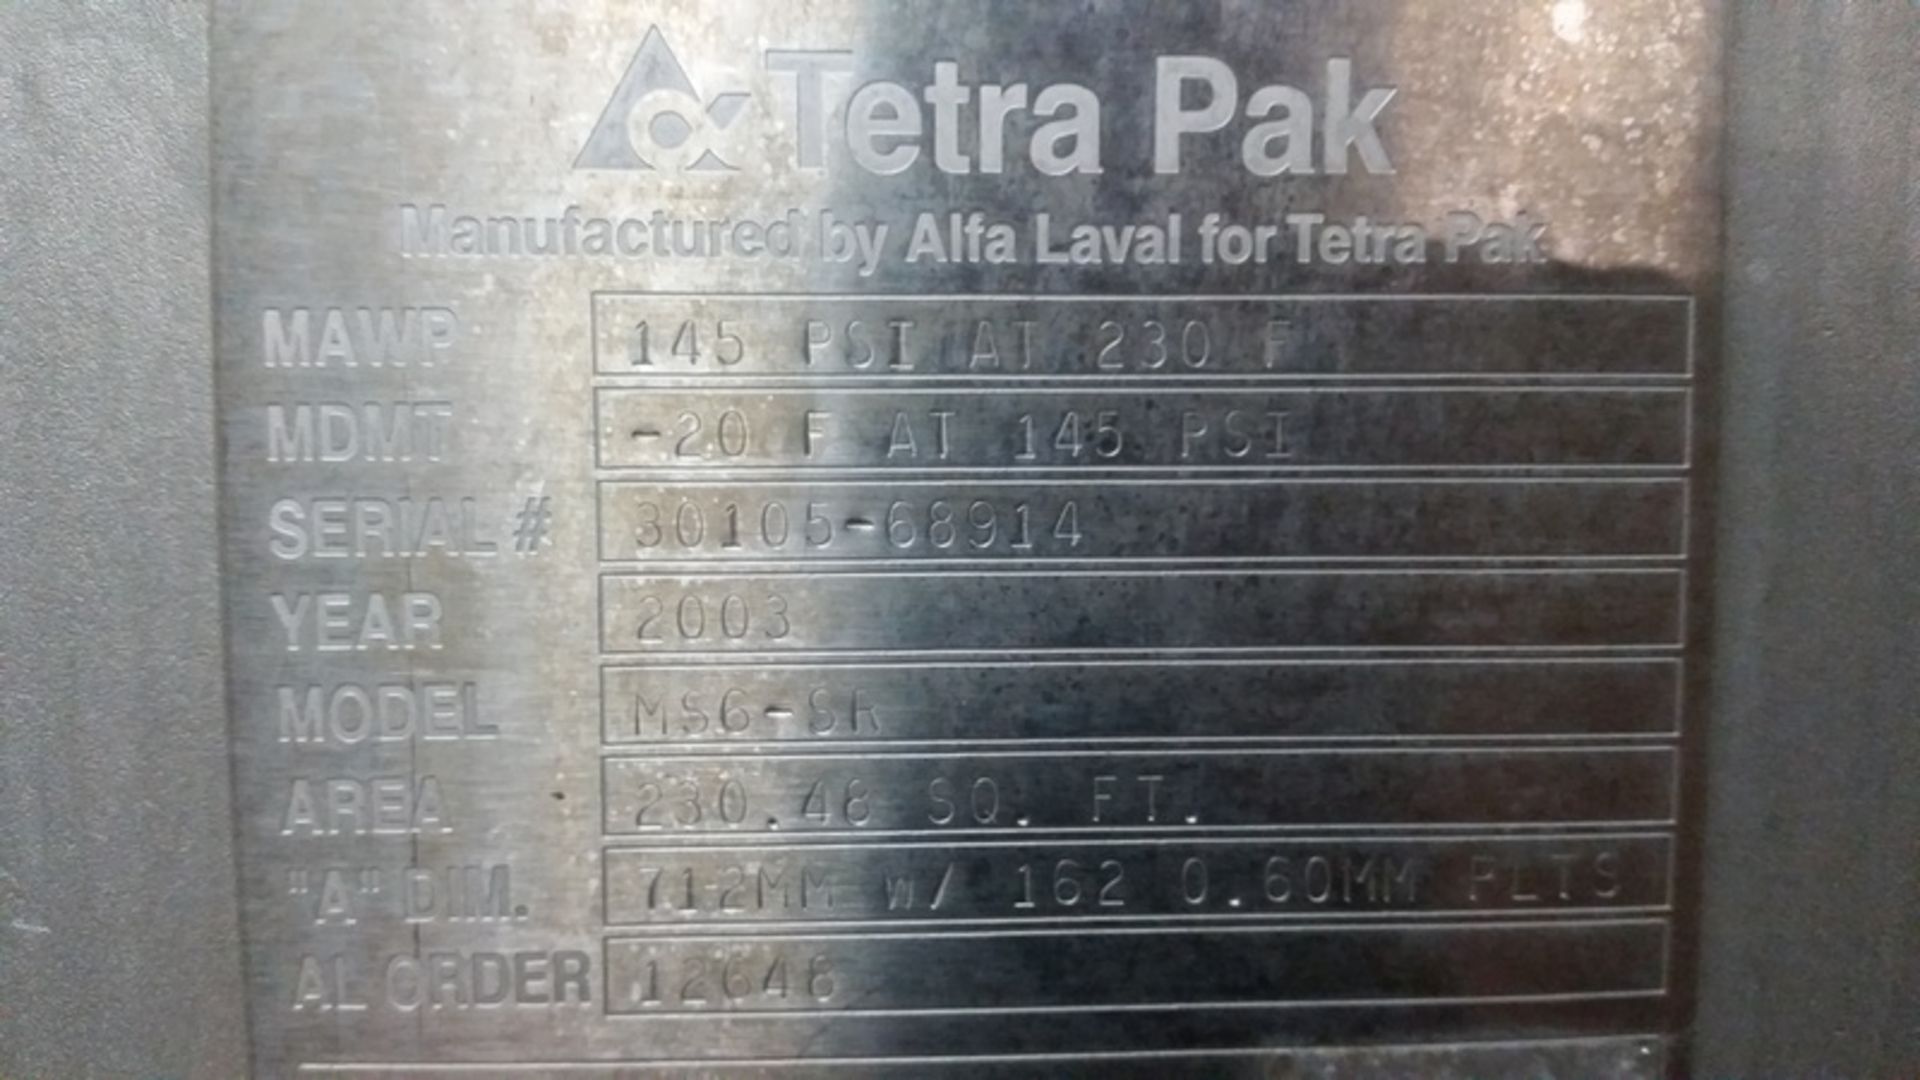 Tetra Pak Plate and Frame Heat Exchanger Model: MS6-SR Serial: 30105-68914 Year: 2003Manufactured by - Image 3 of 4